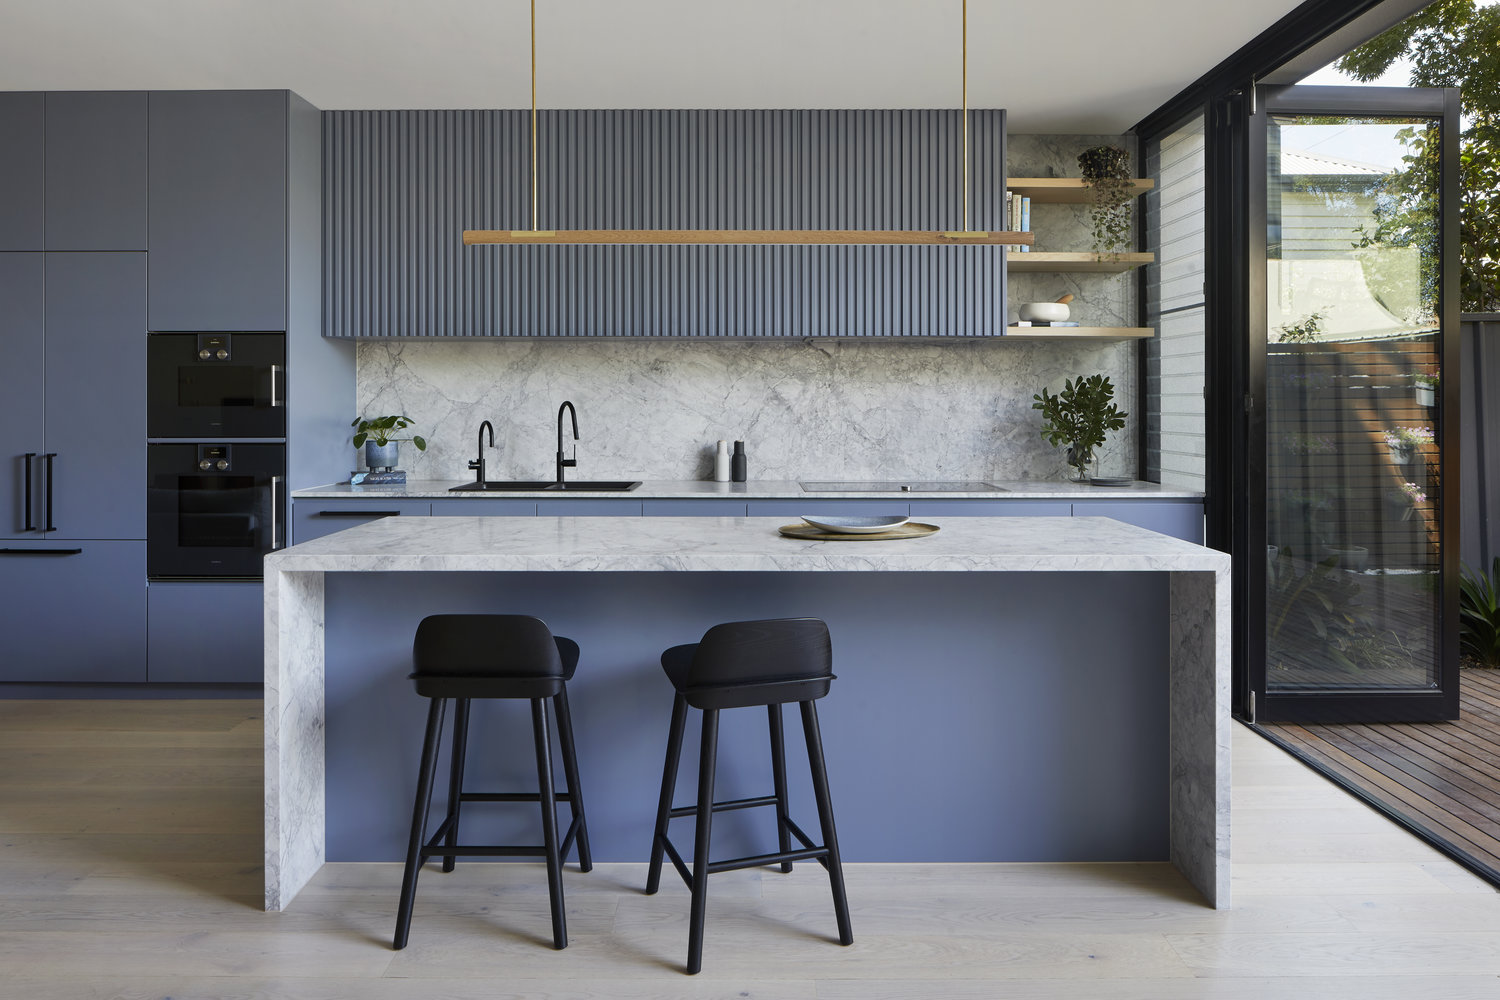 25 Blue Kitchen Design Ideas for a Calm Cooking Space